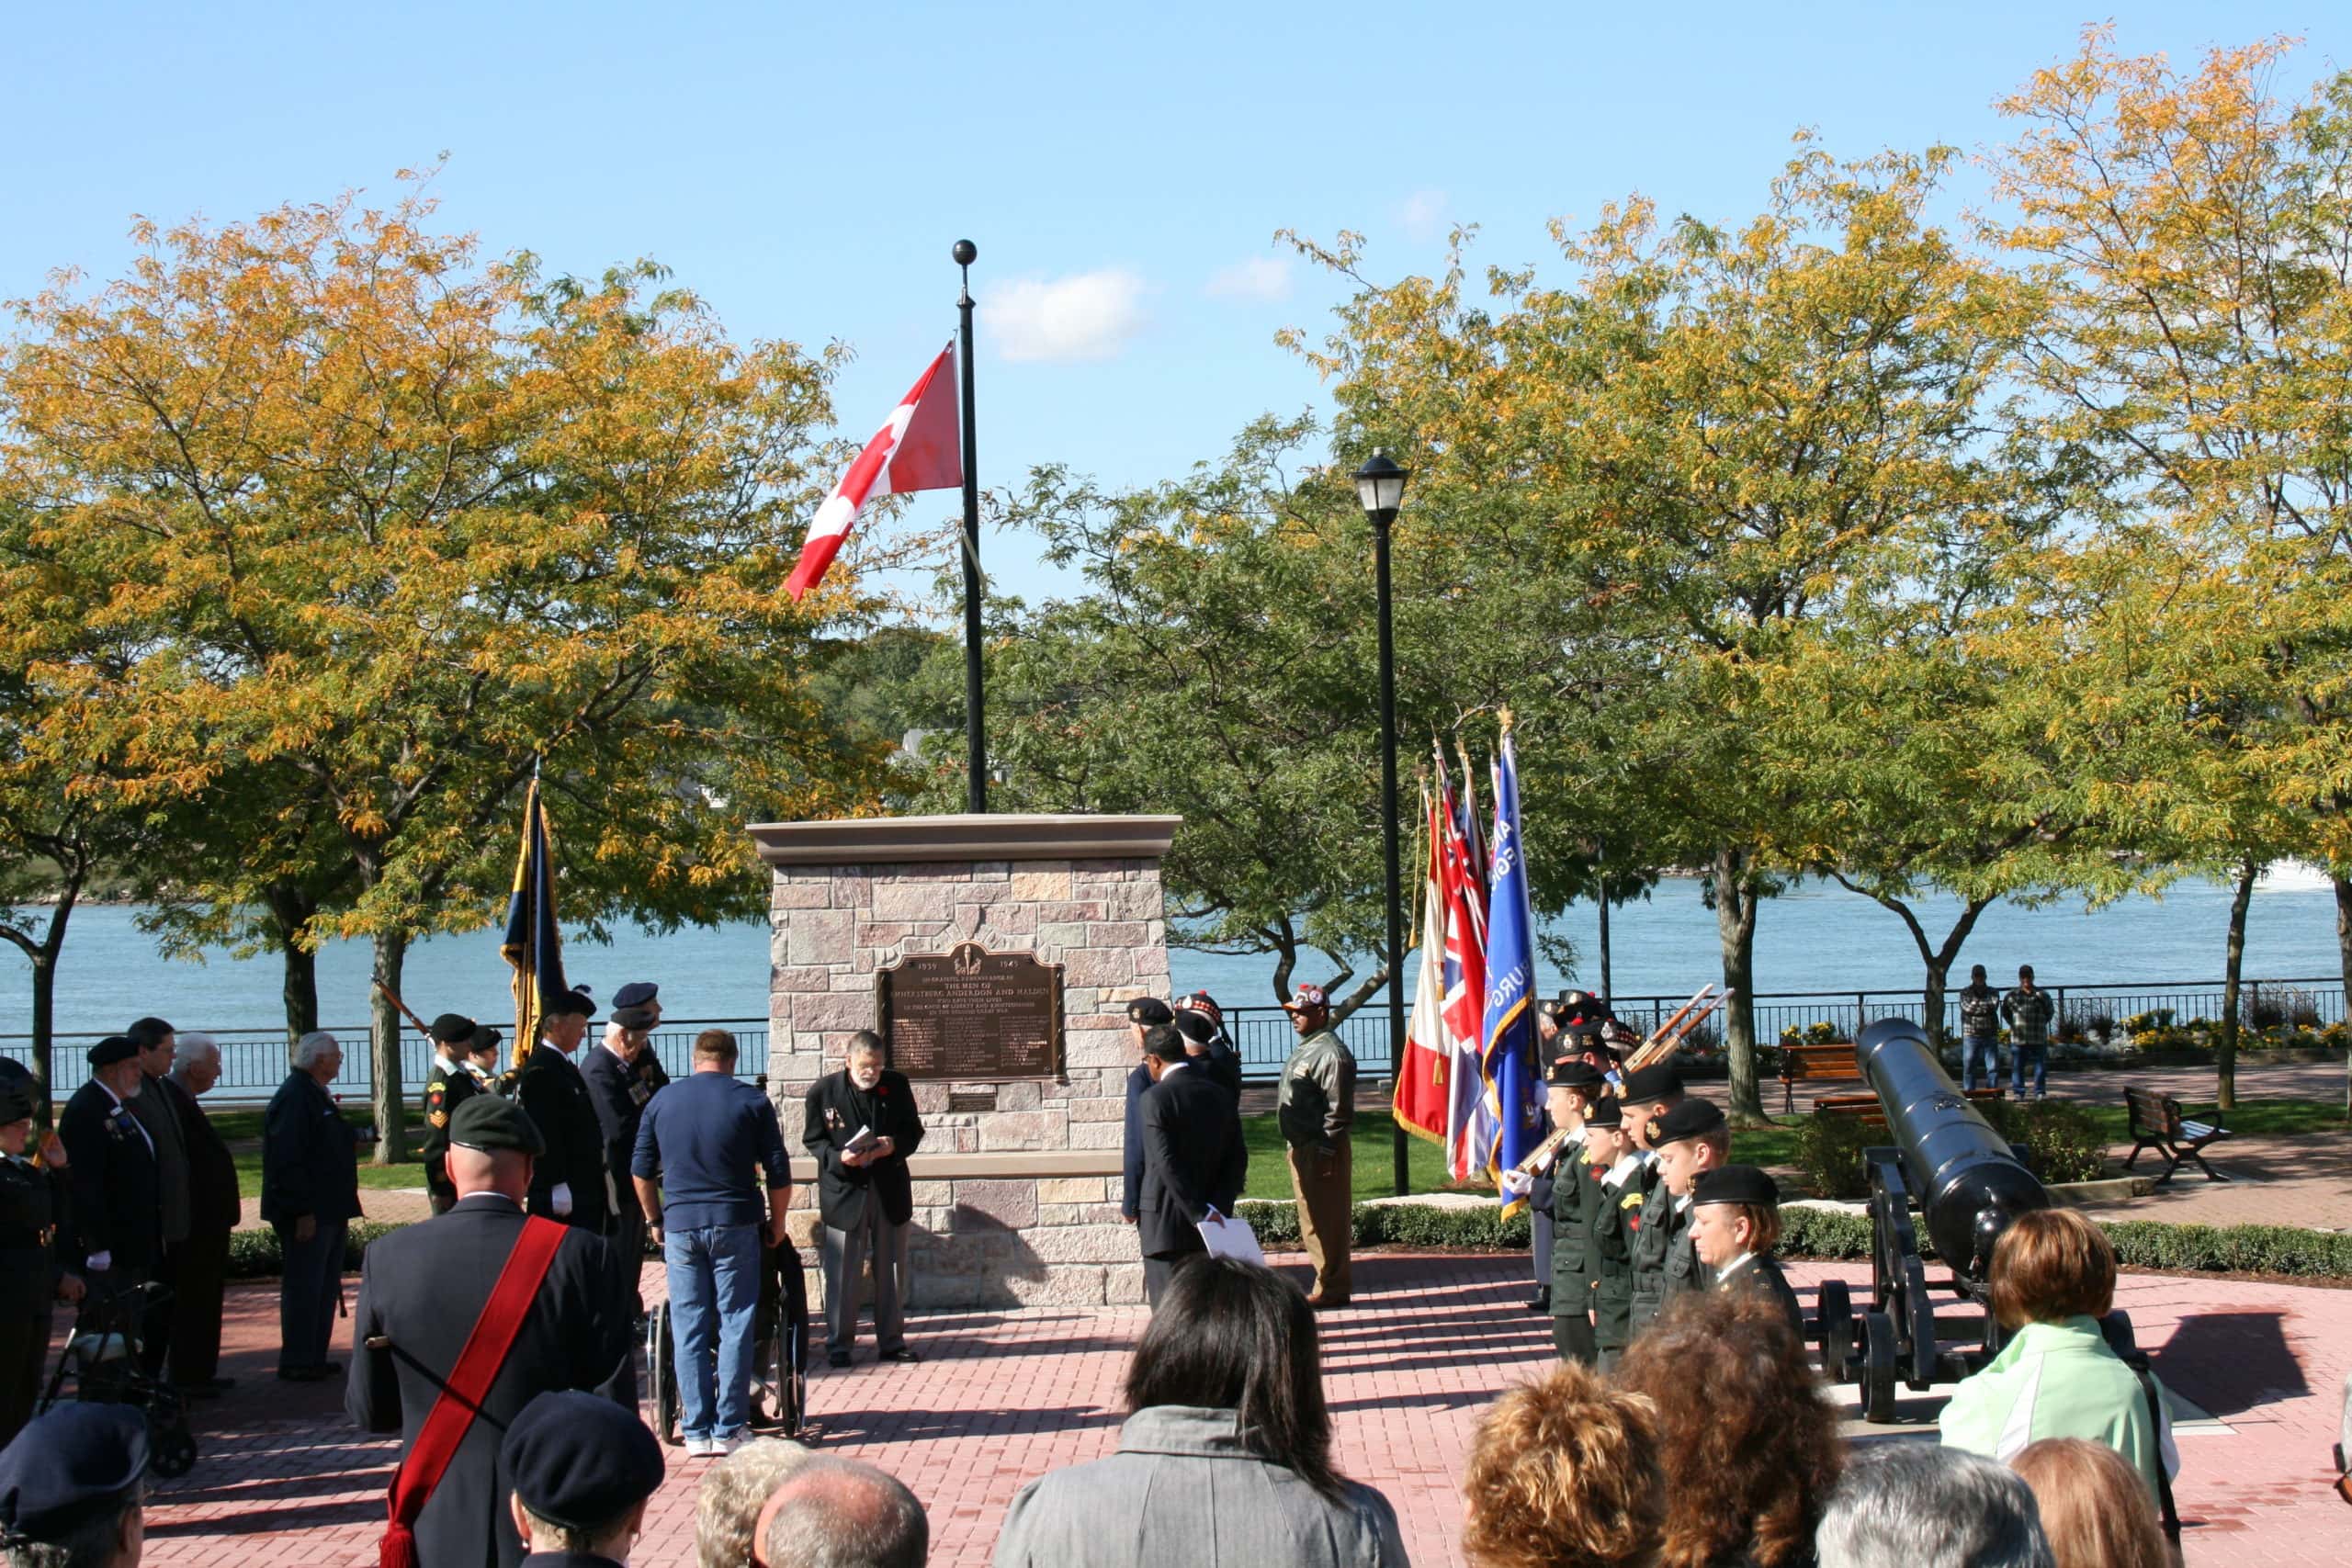 A Remembrance Day service at King's Navy Yard Park.